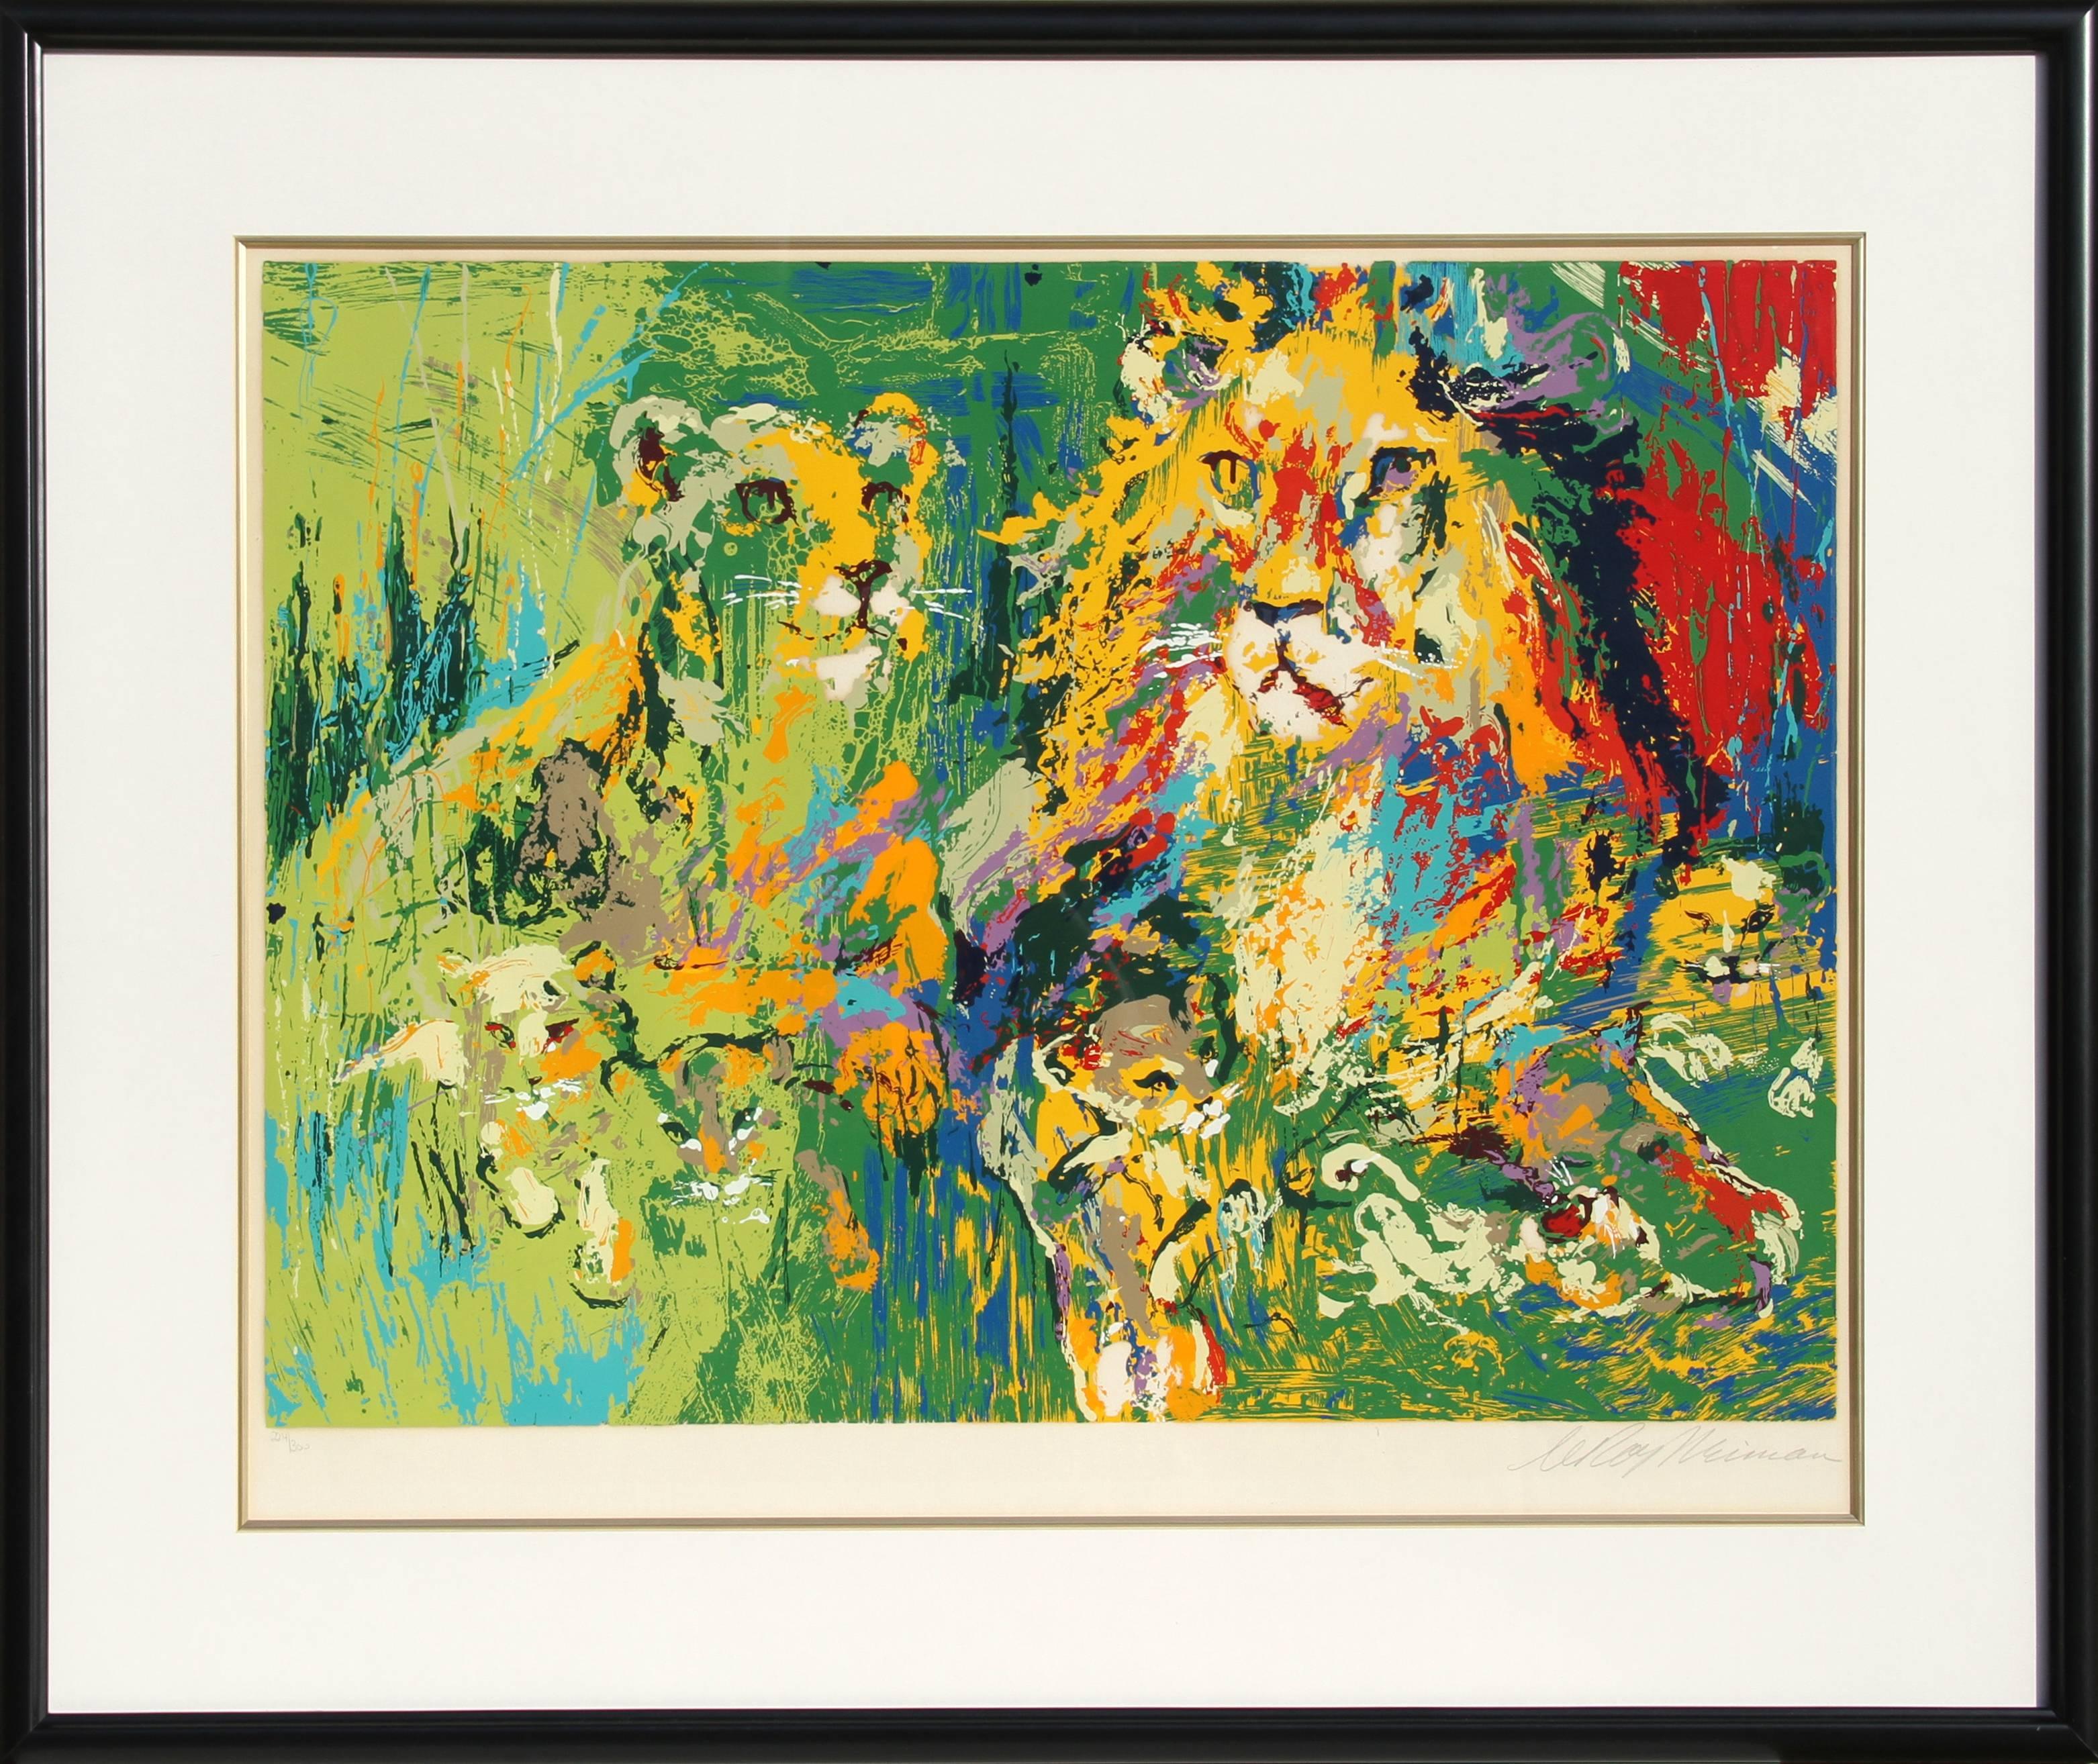 Lion Family, Psychedelic Screenprint by LeRoy Neiman